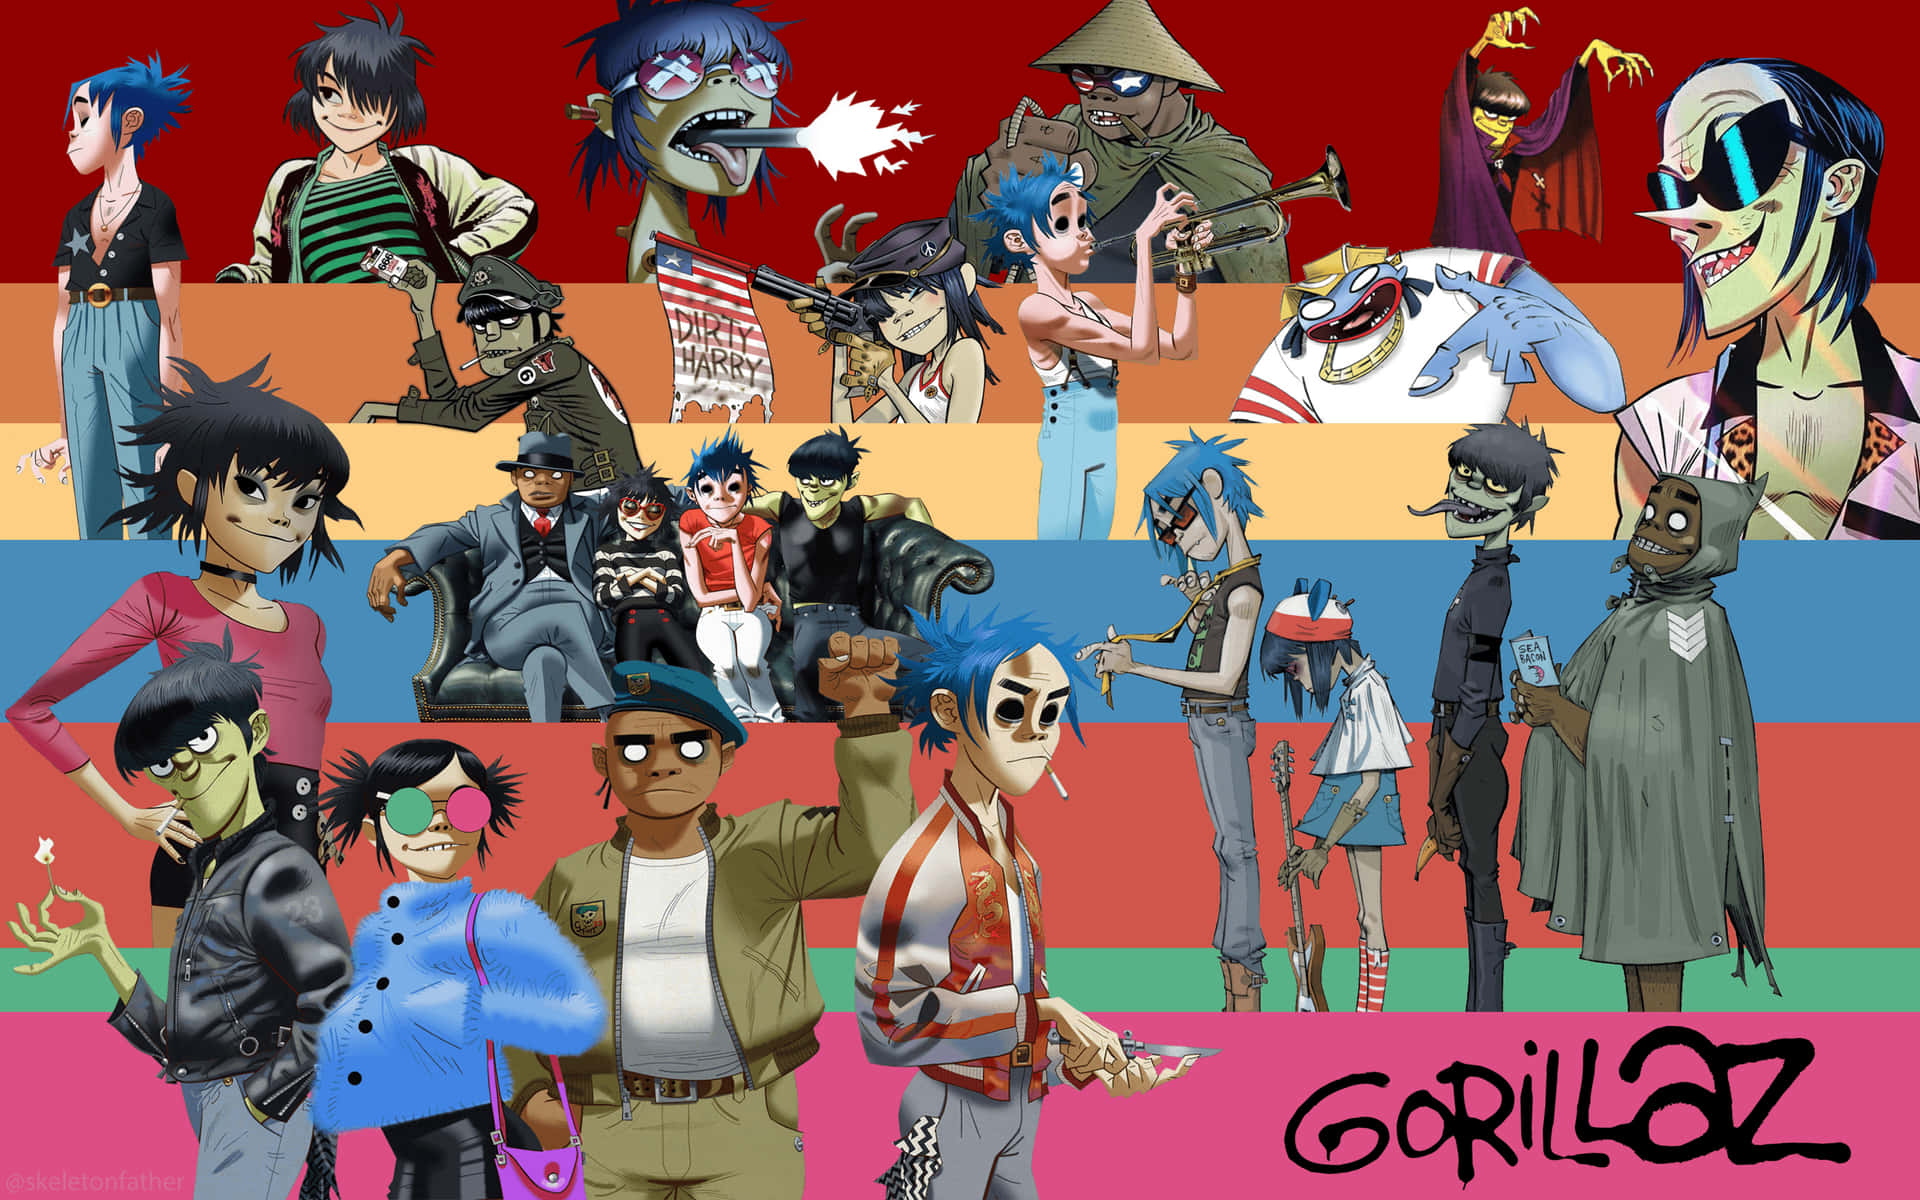 Listen to "Gorillaz 4K" and enjoy the eclectic vibes. Wallpaper